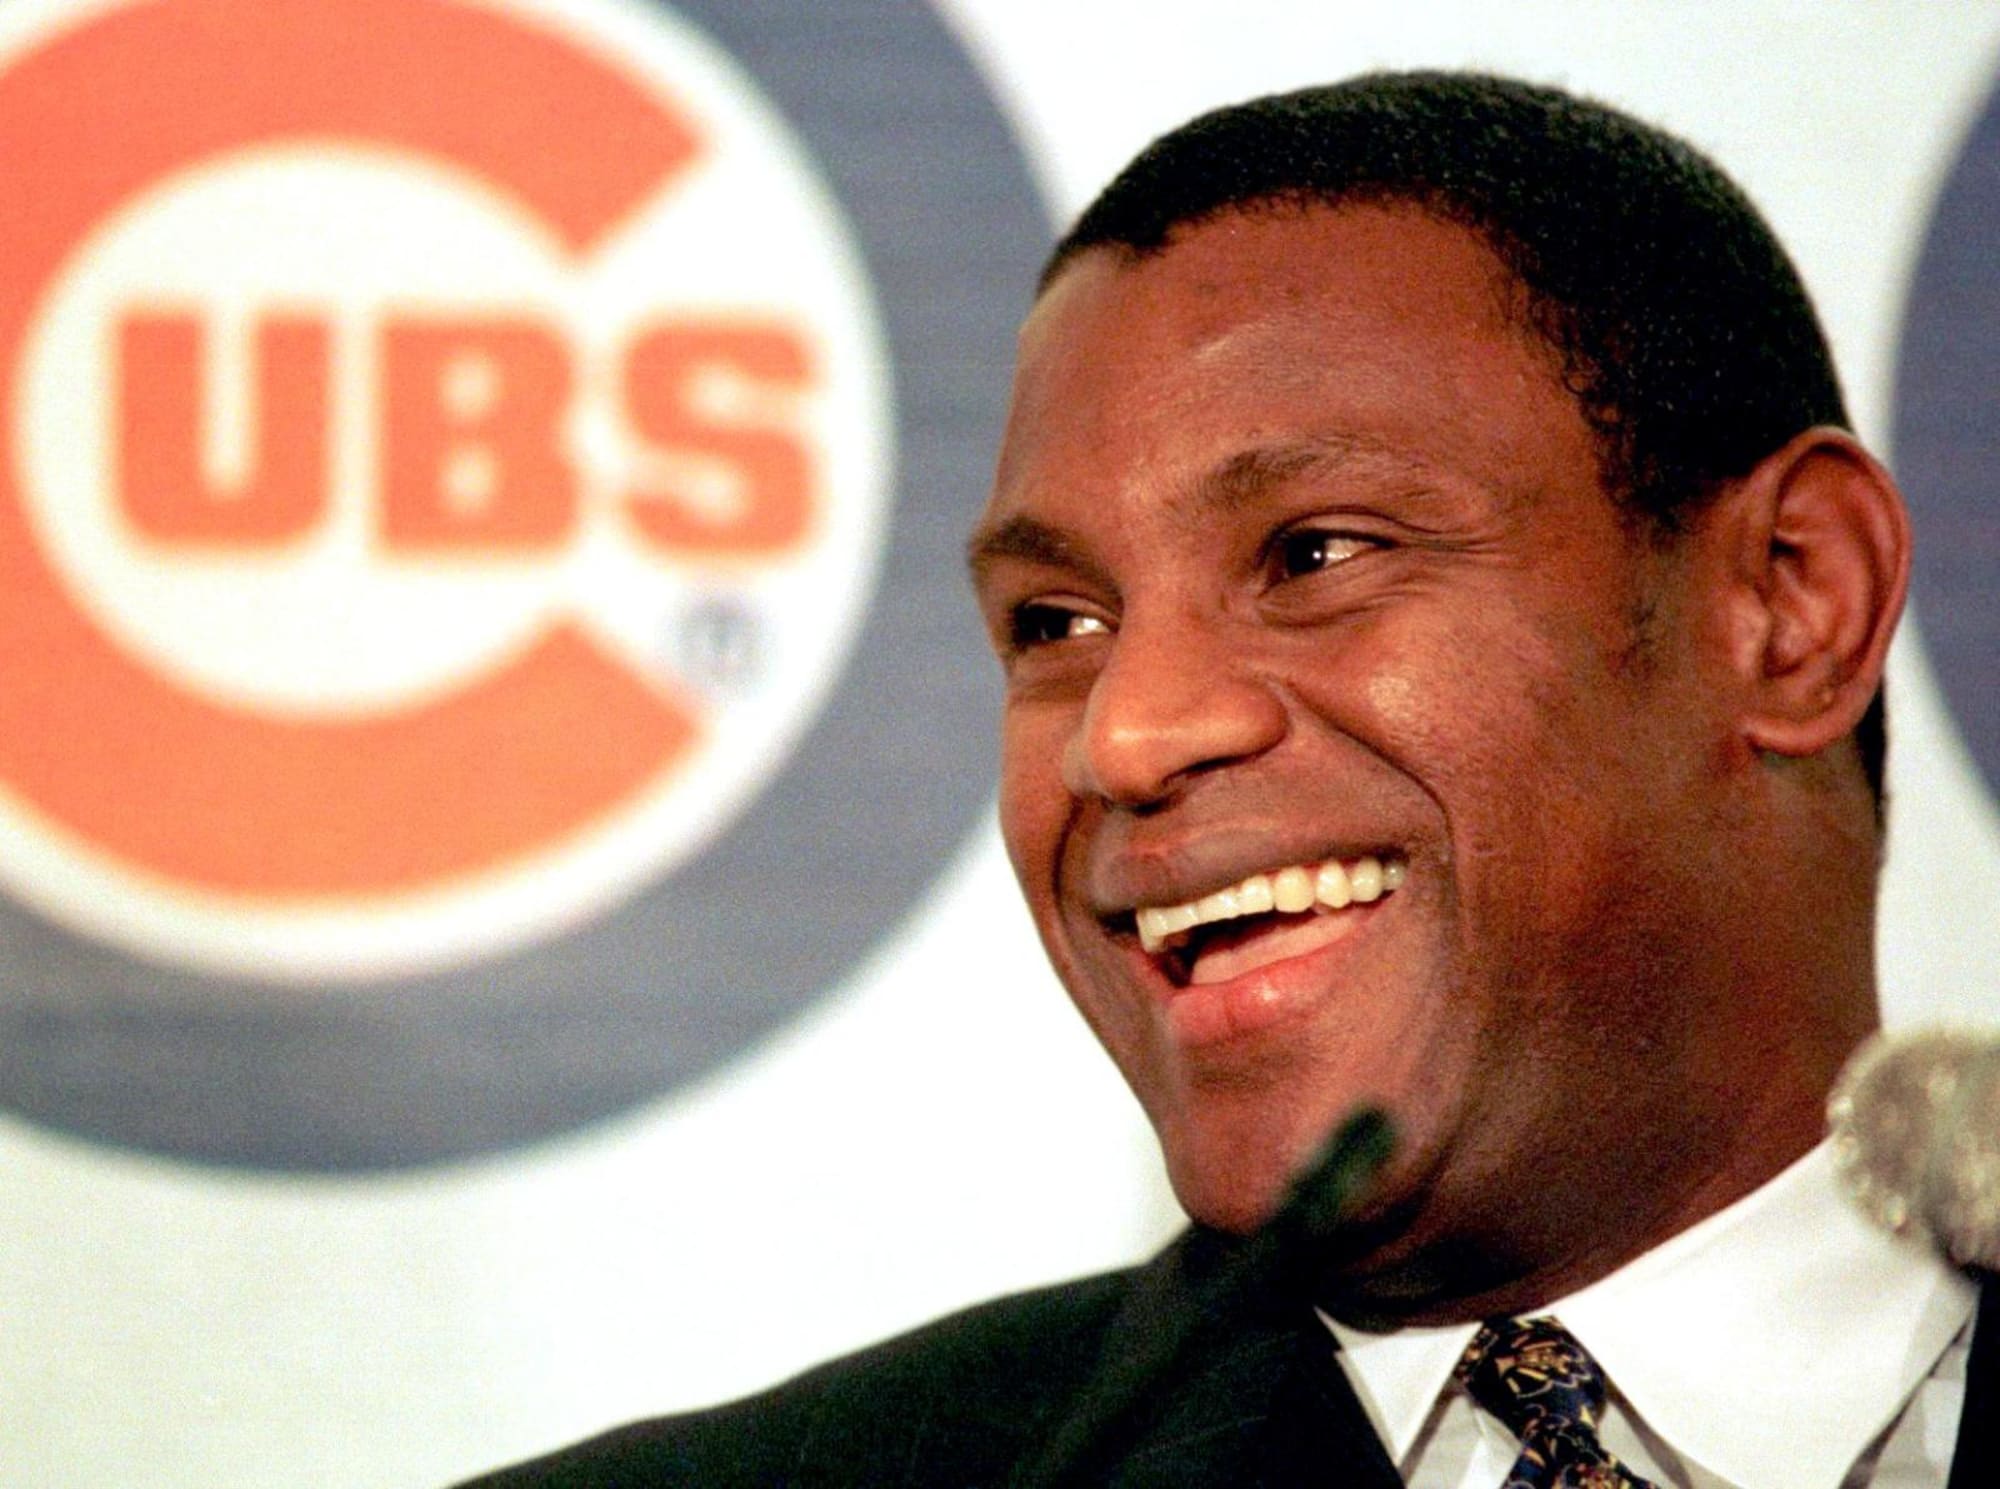 Why the Chicago Cubs Should Reconcile with Sammy Sosa